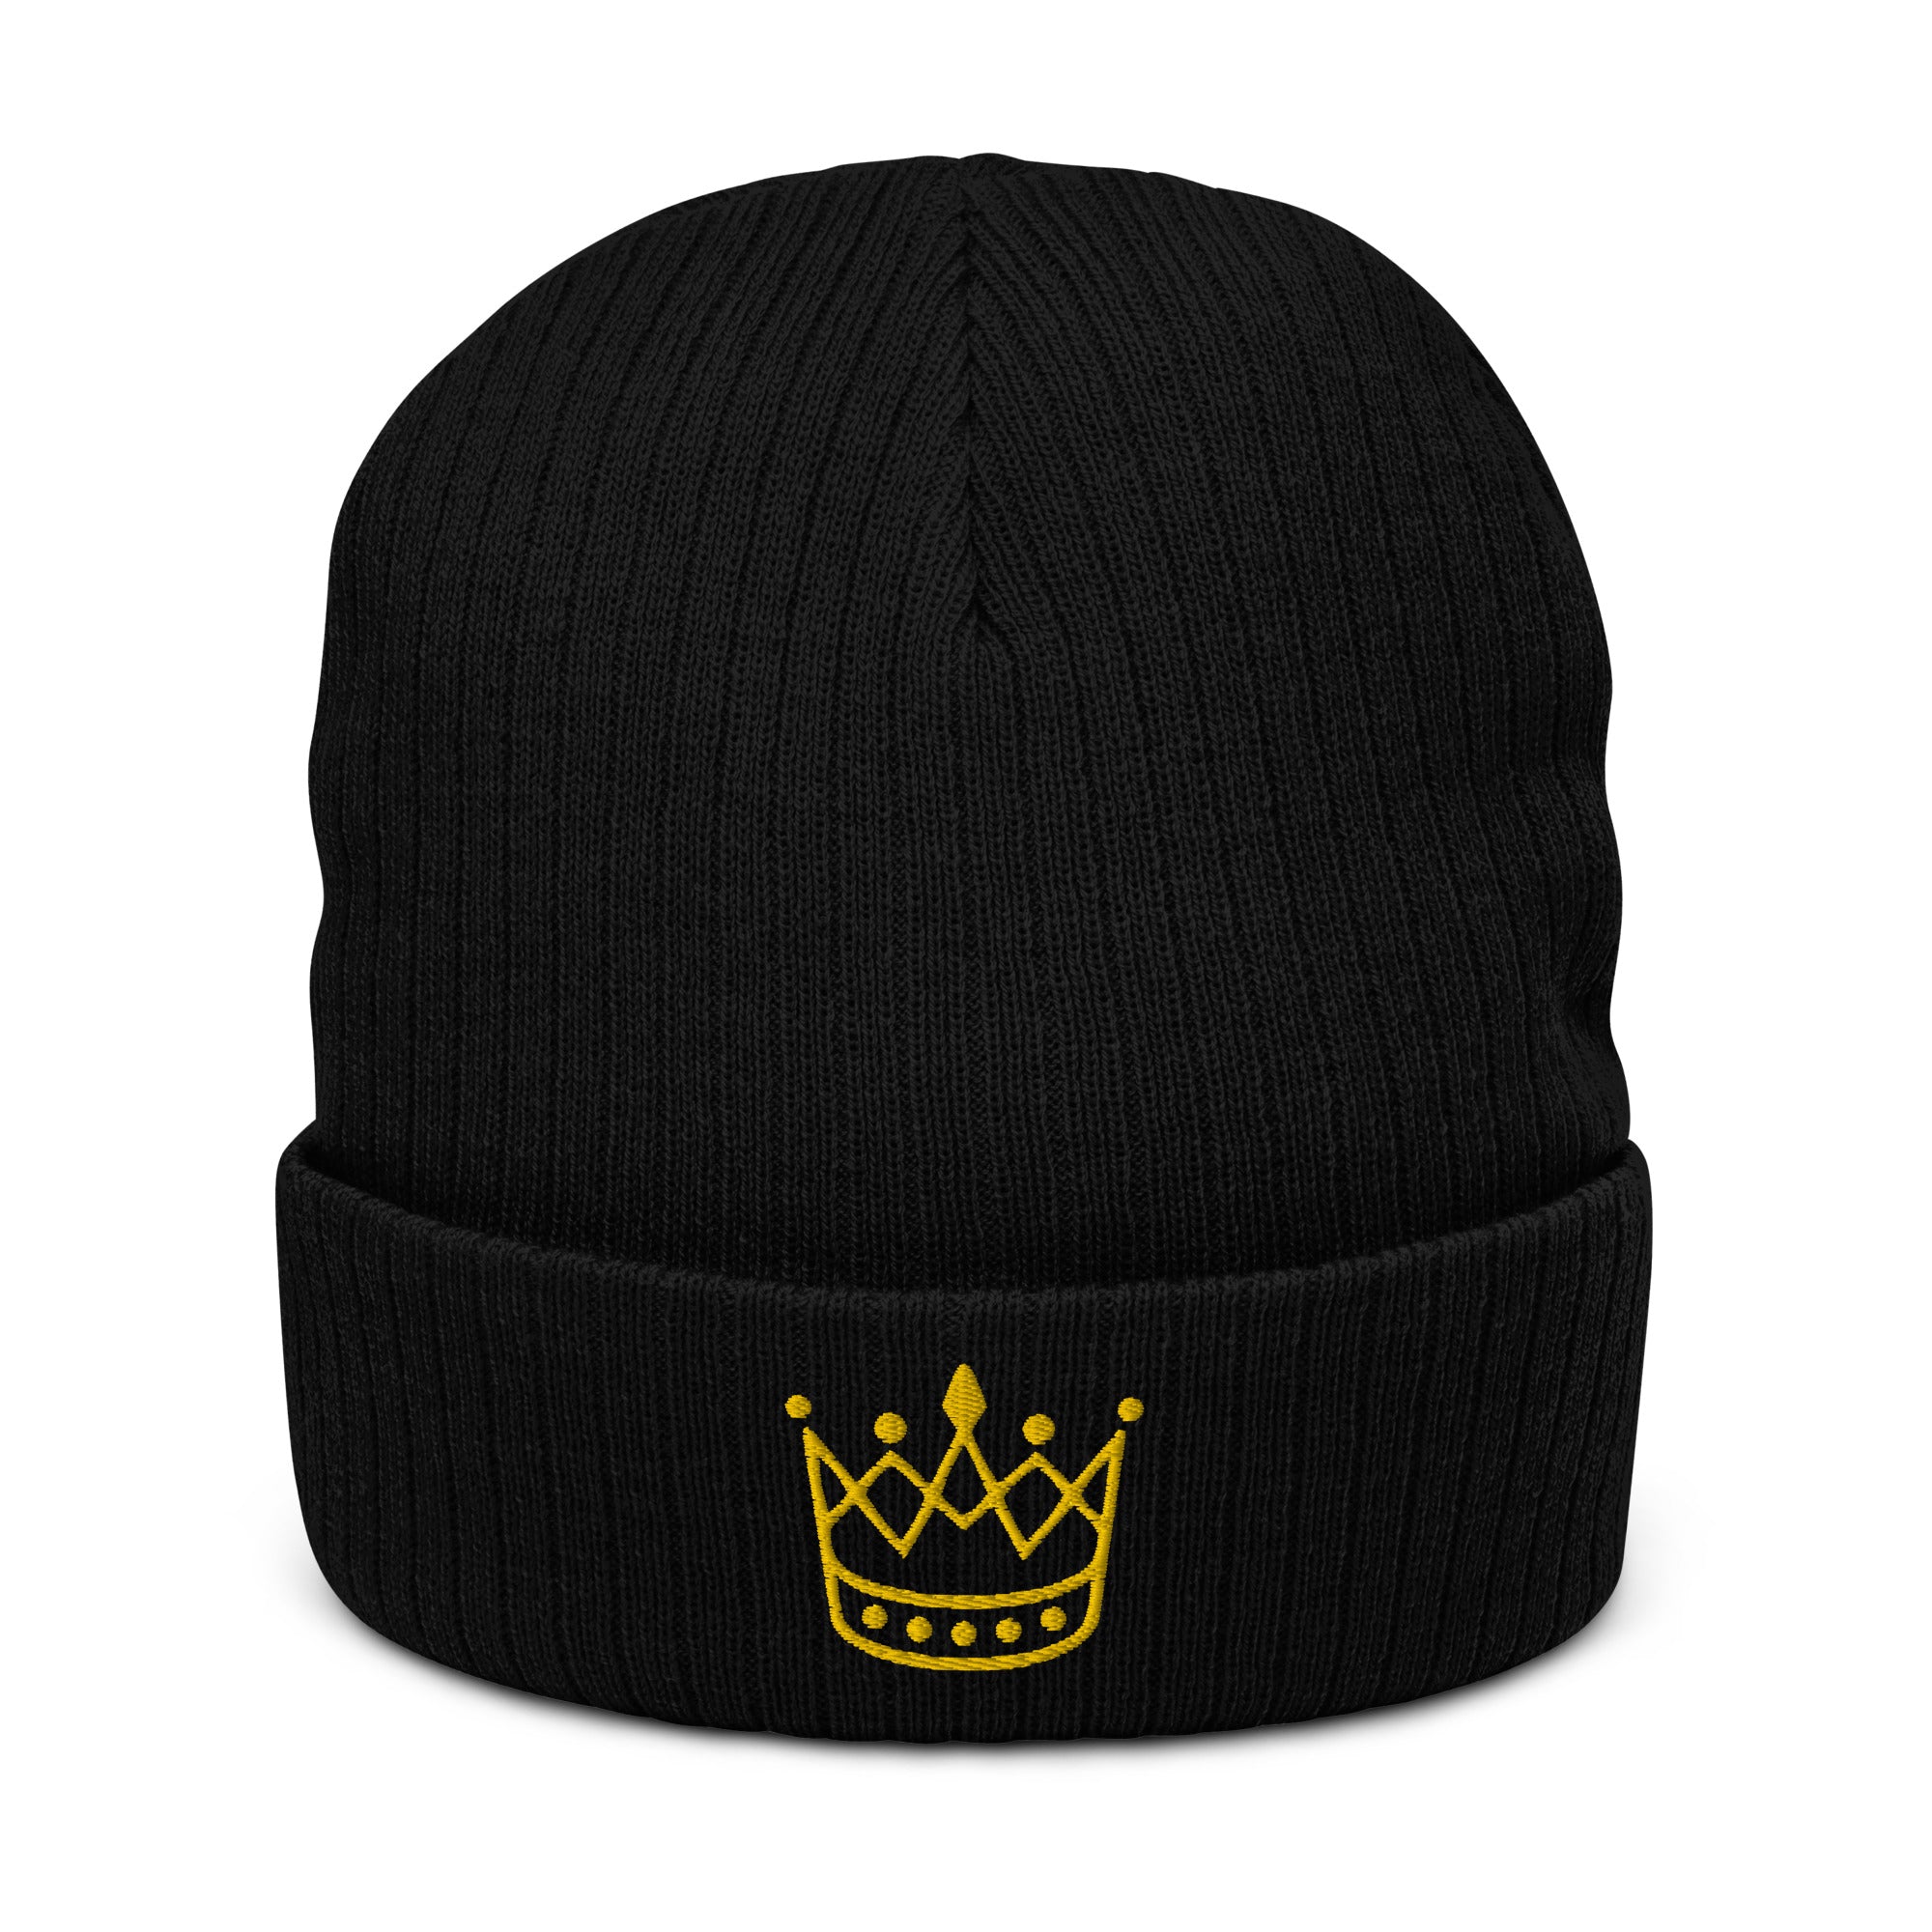 Ribbed knit beanie - King or Queen Crown